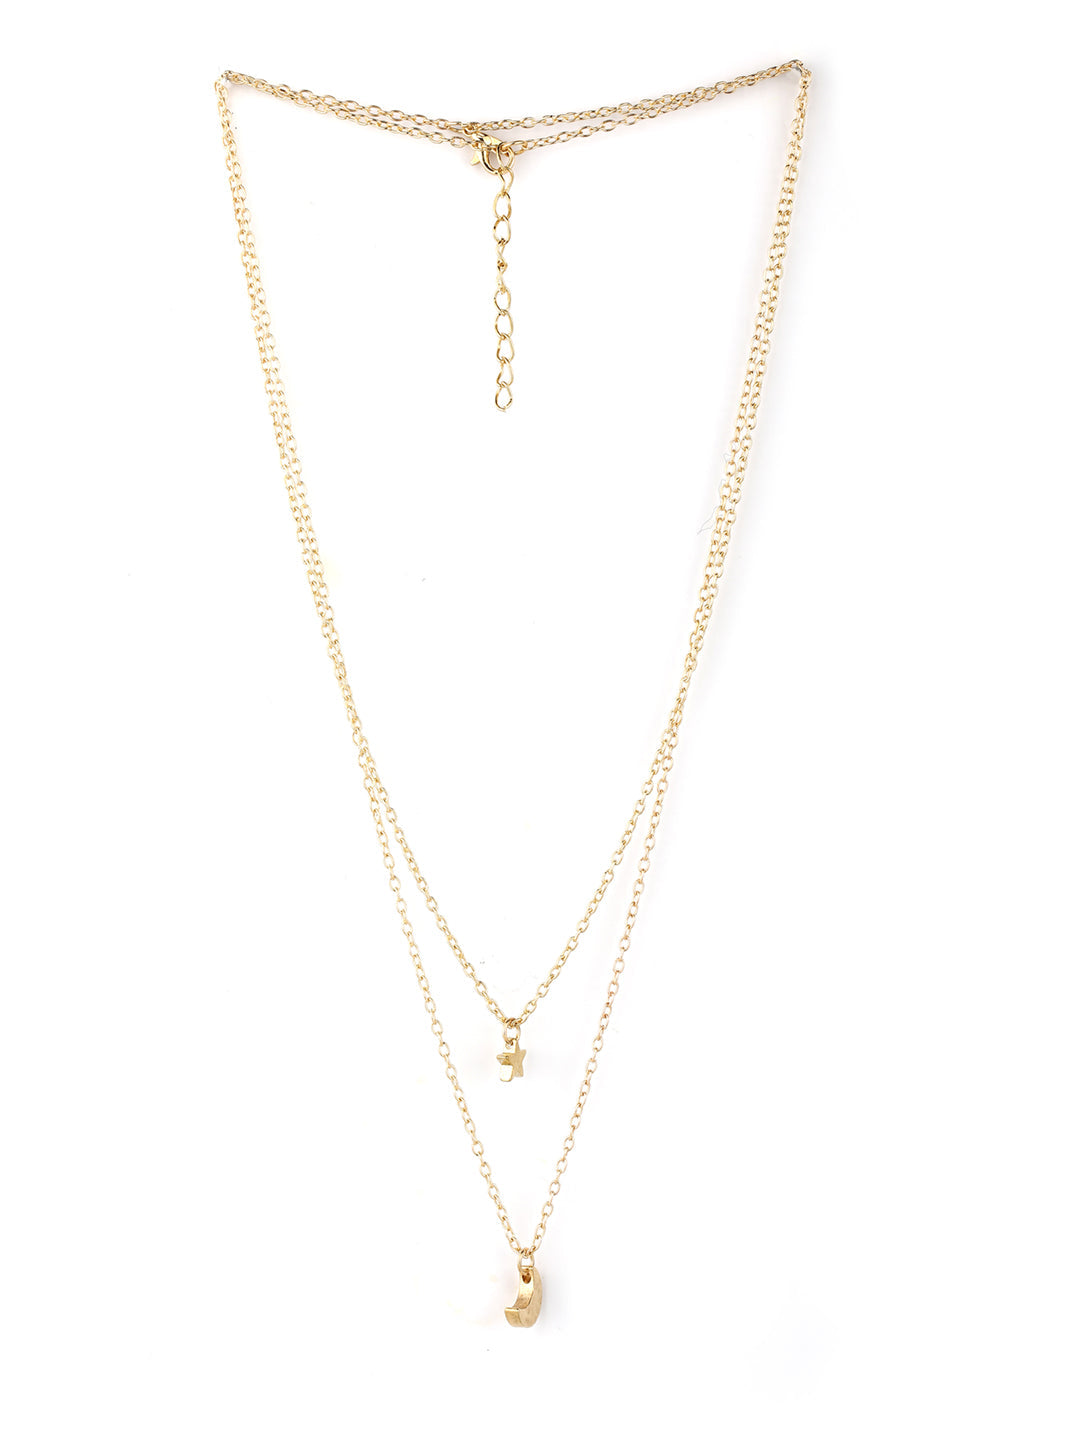 Women's  Combo of 2 Gold & Silver Plated Layered Necklace - Priyaasi